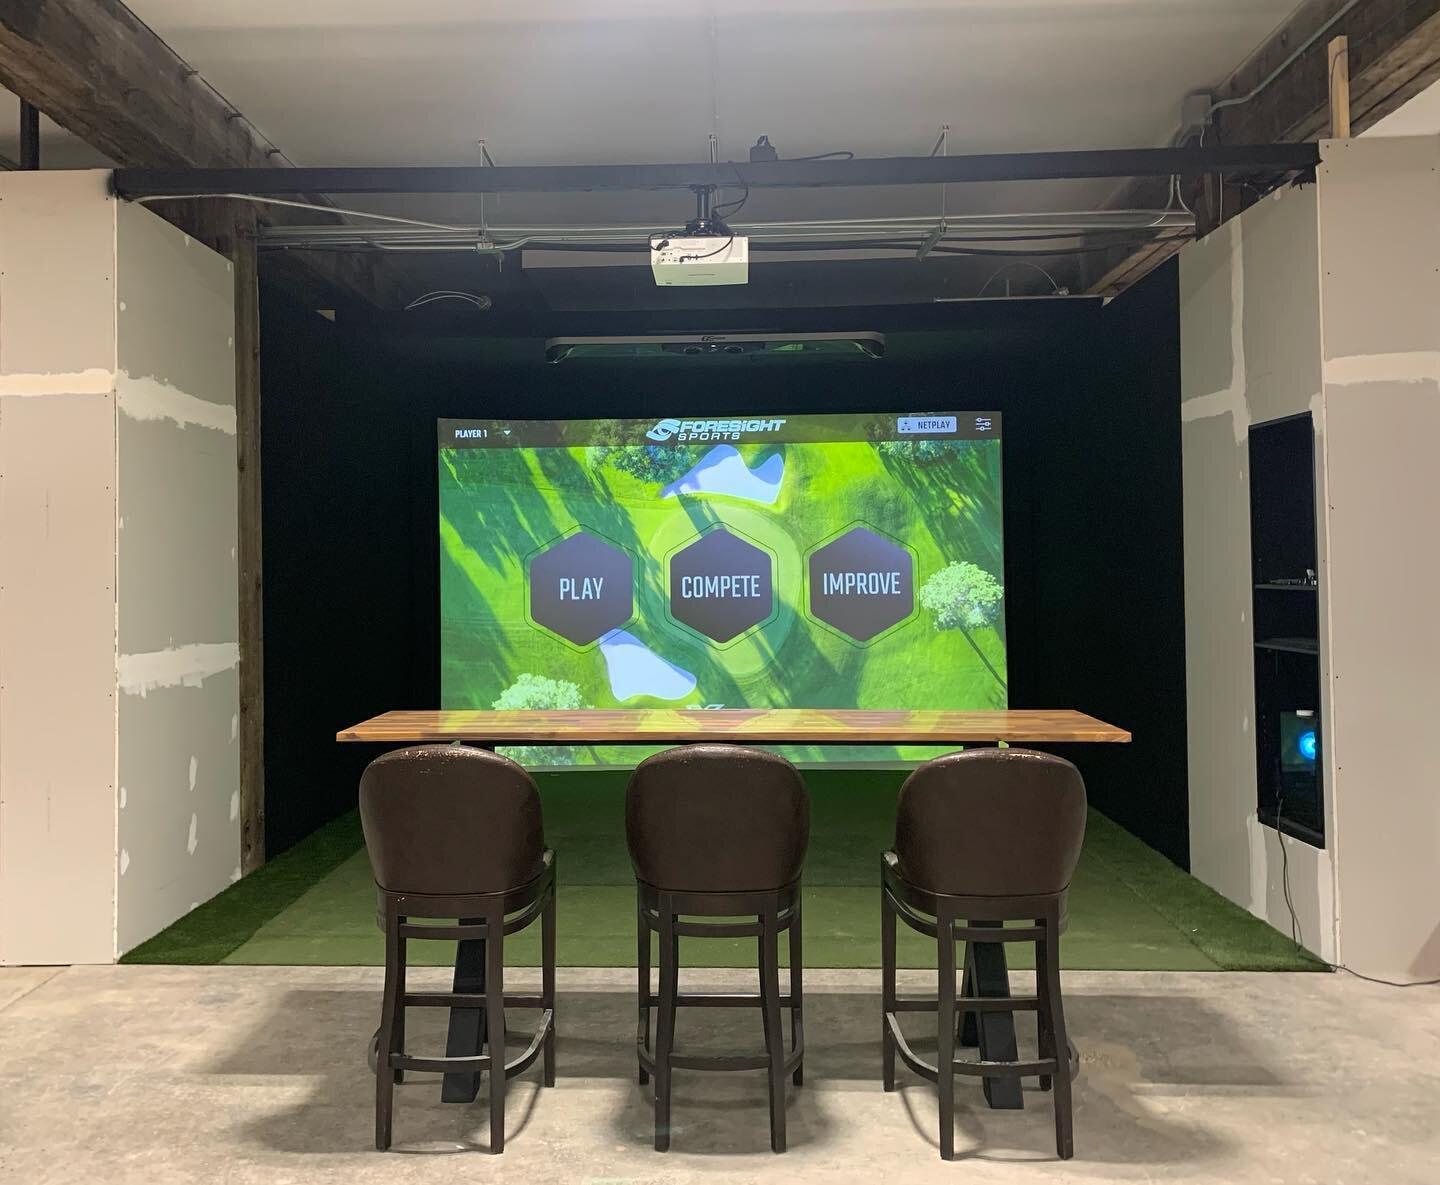 Sneak Peak X4!!! Evo is Coming together. Countdown is on. Stay tuned for upcoming events, opening date, and offers coming soon. #evogolfbrandon